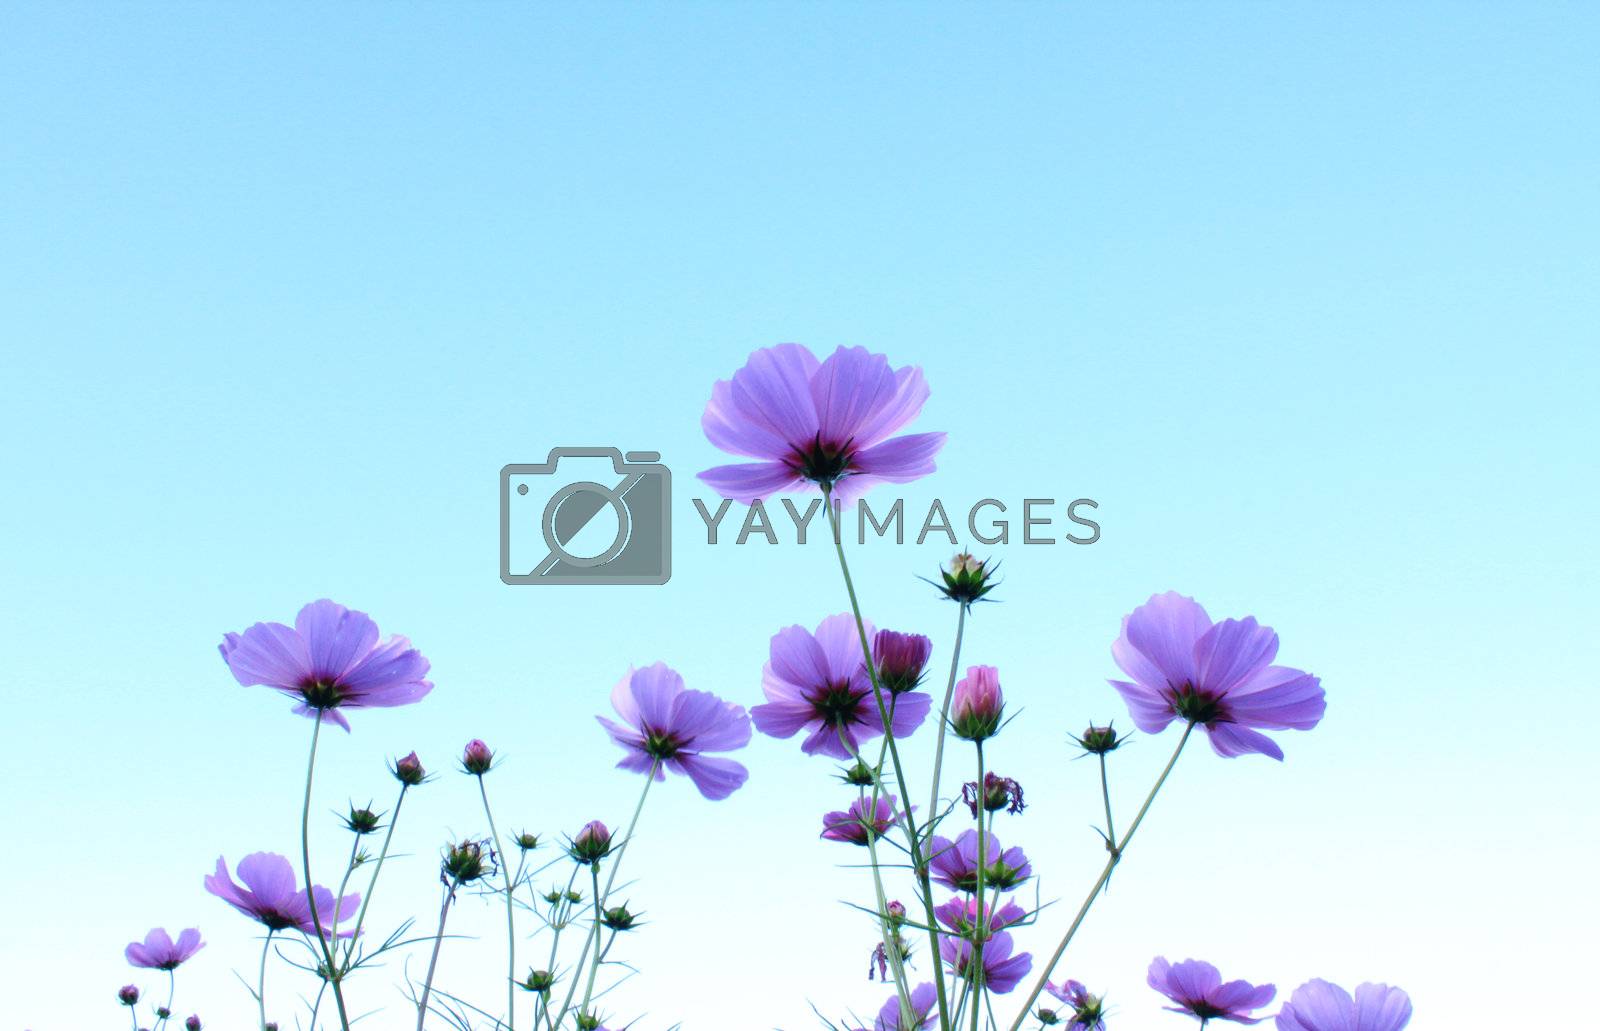 Royalty free image of Pink flower with blue sky by nuchylee